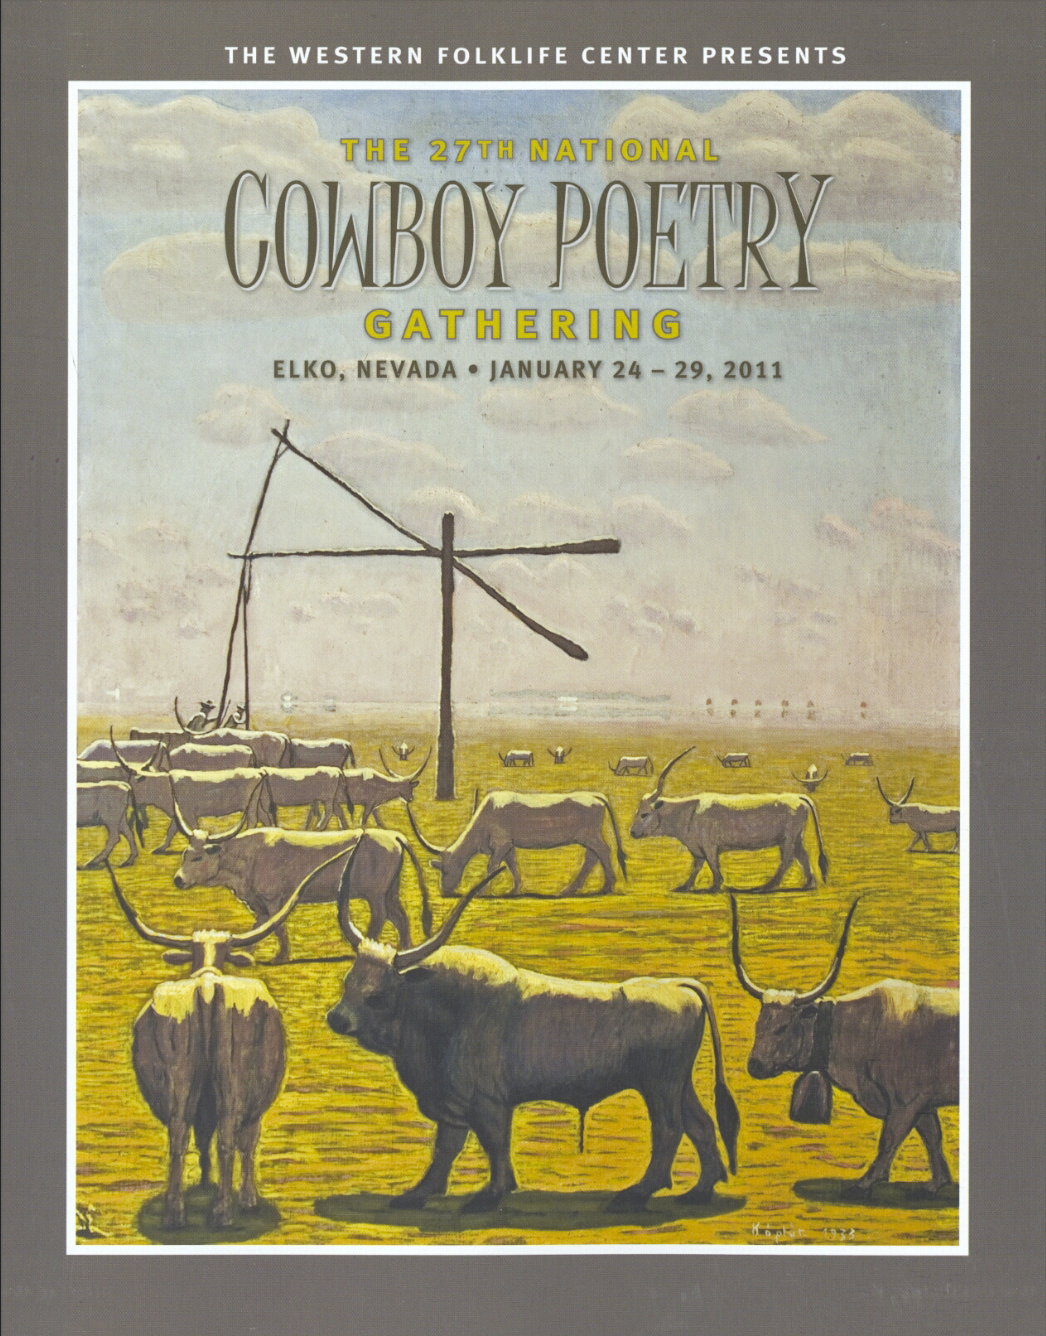 Program cover from the 27th National Cowboy Poetry Gathering in 2011. Artwork by Káplár Miklós.